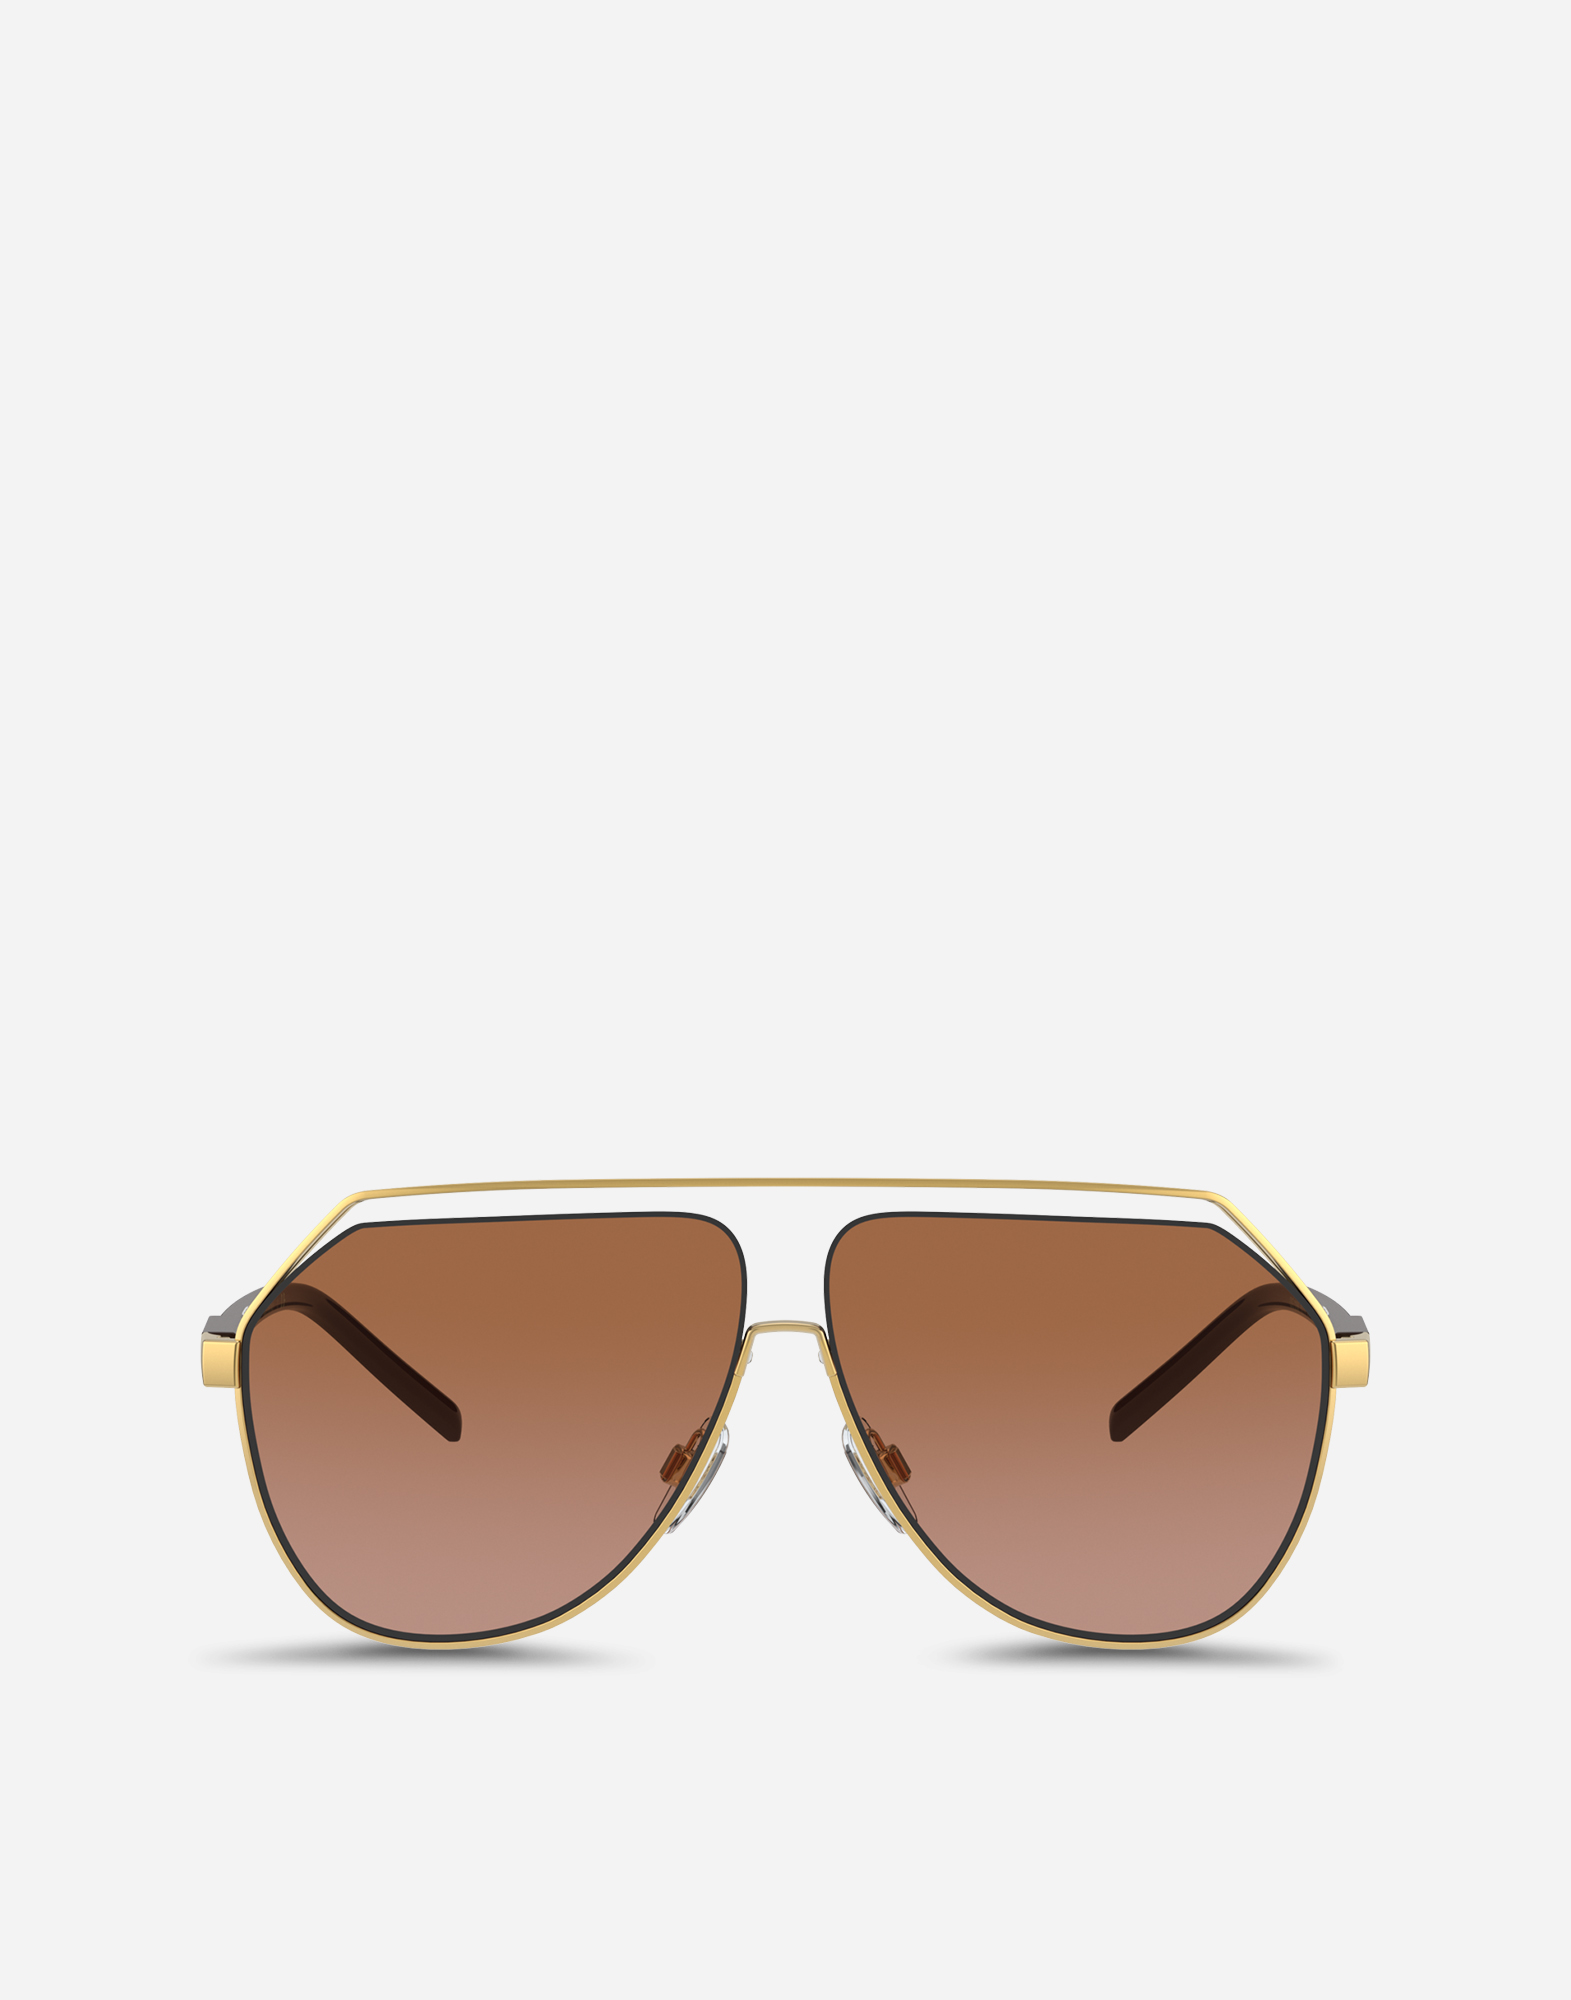 Less is chic sunglasses in Gold